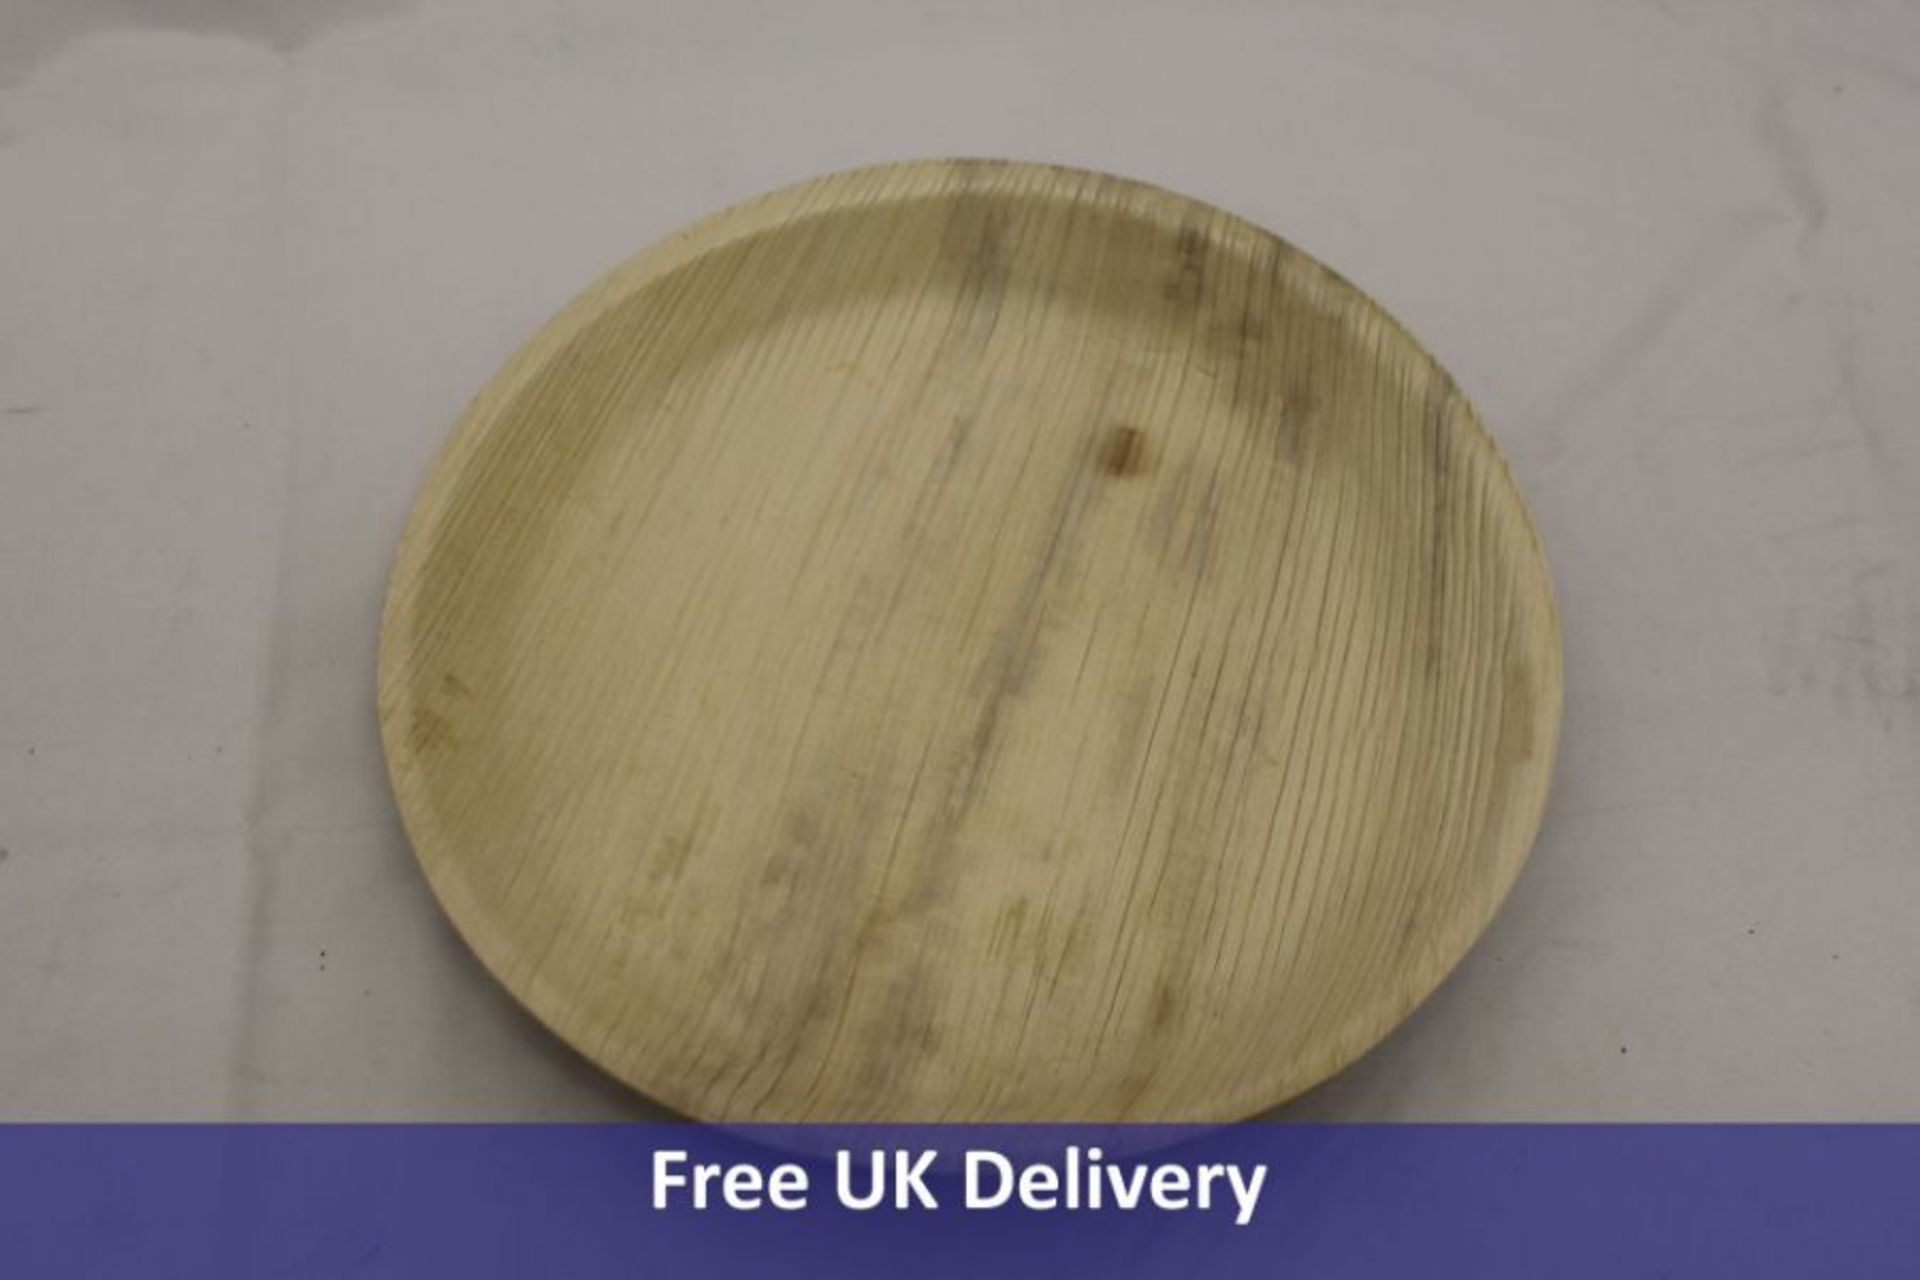 10" Round Like Bamboo Plate, Disposable